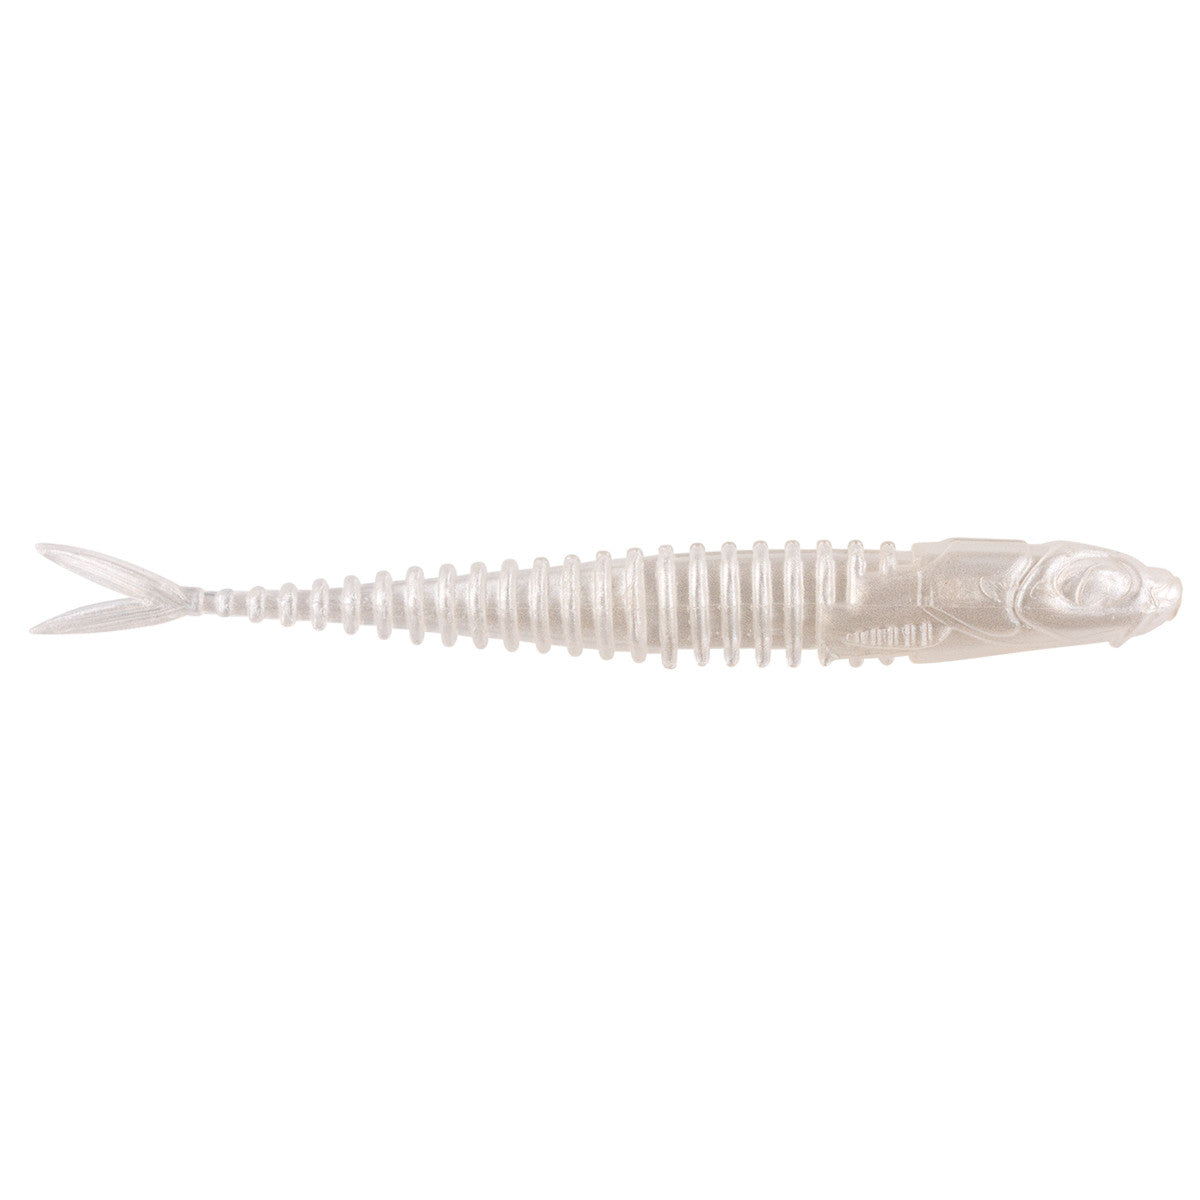 Northland Fishing Tackle Eye-Candy Minnow - Pearl White - 3